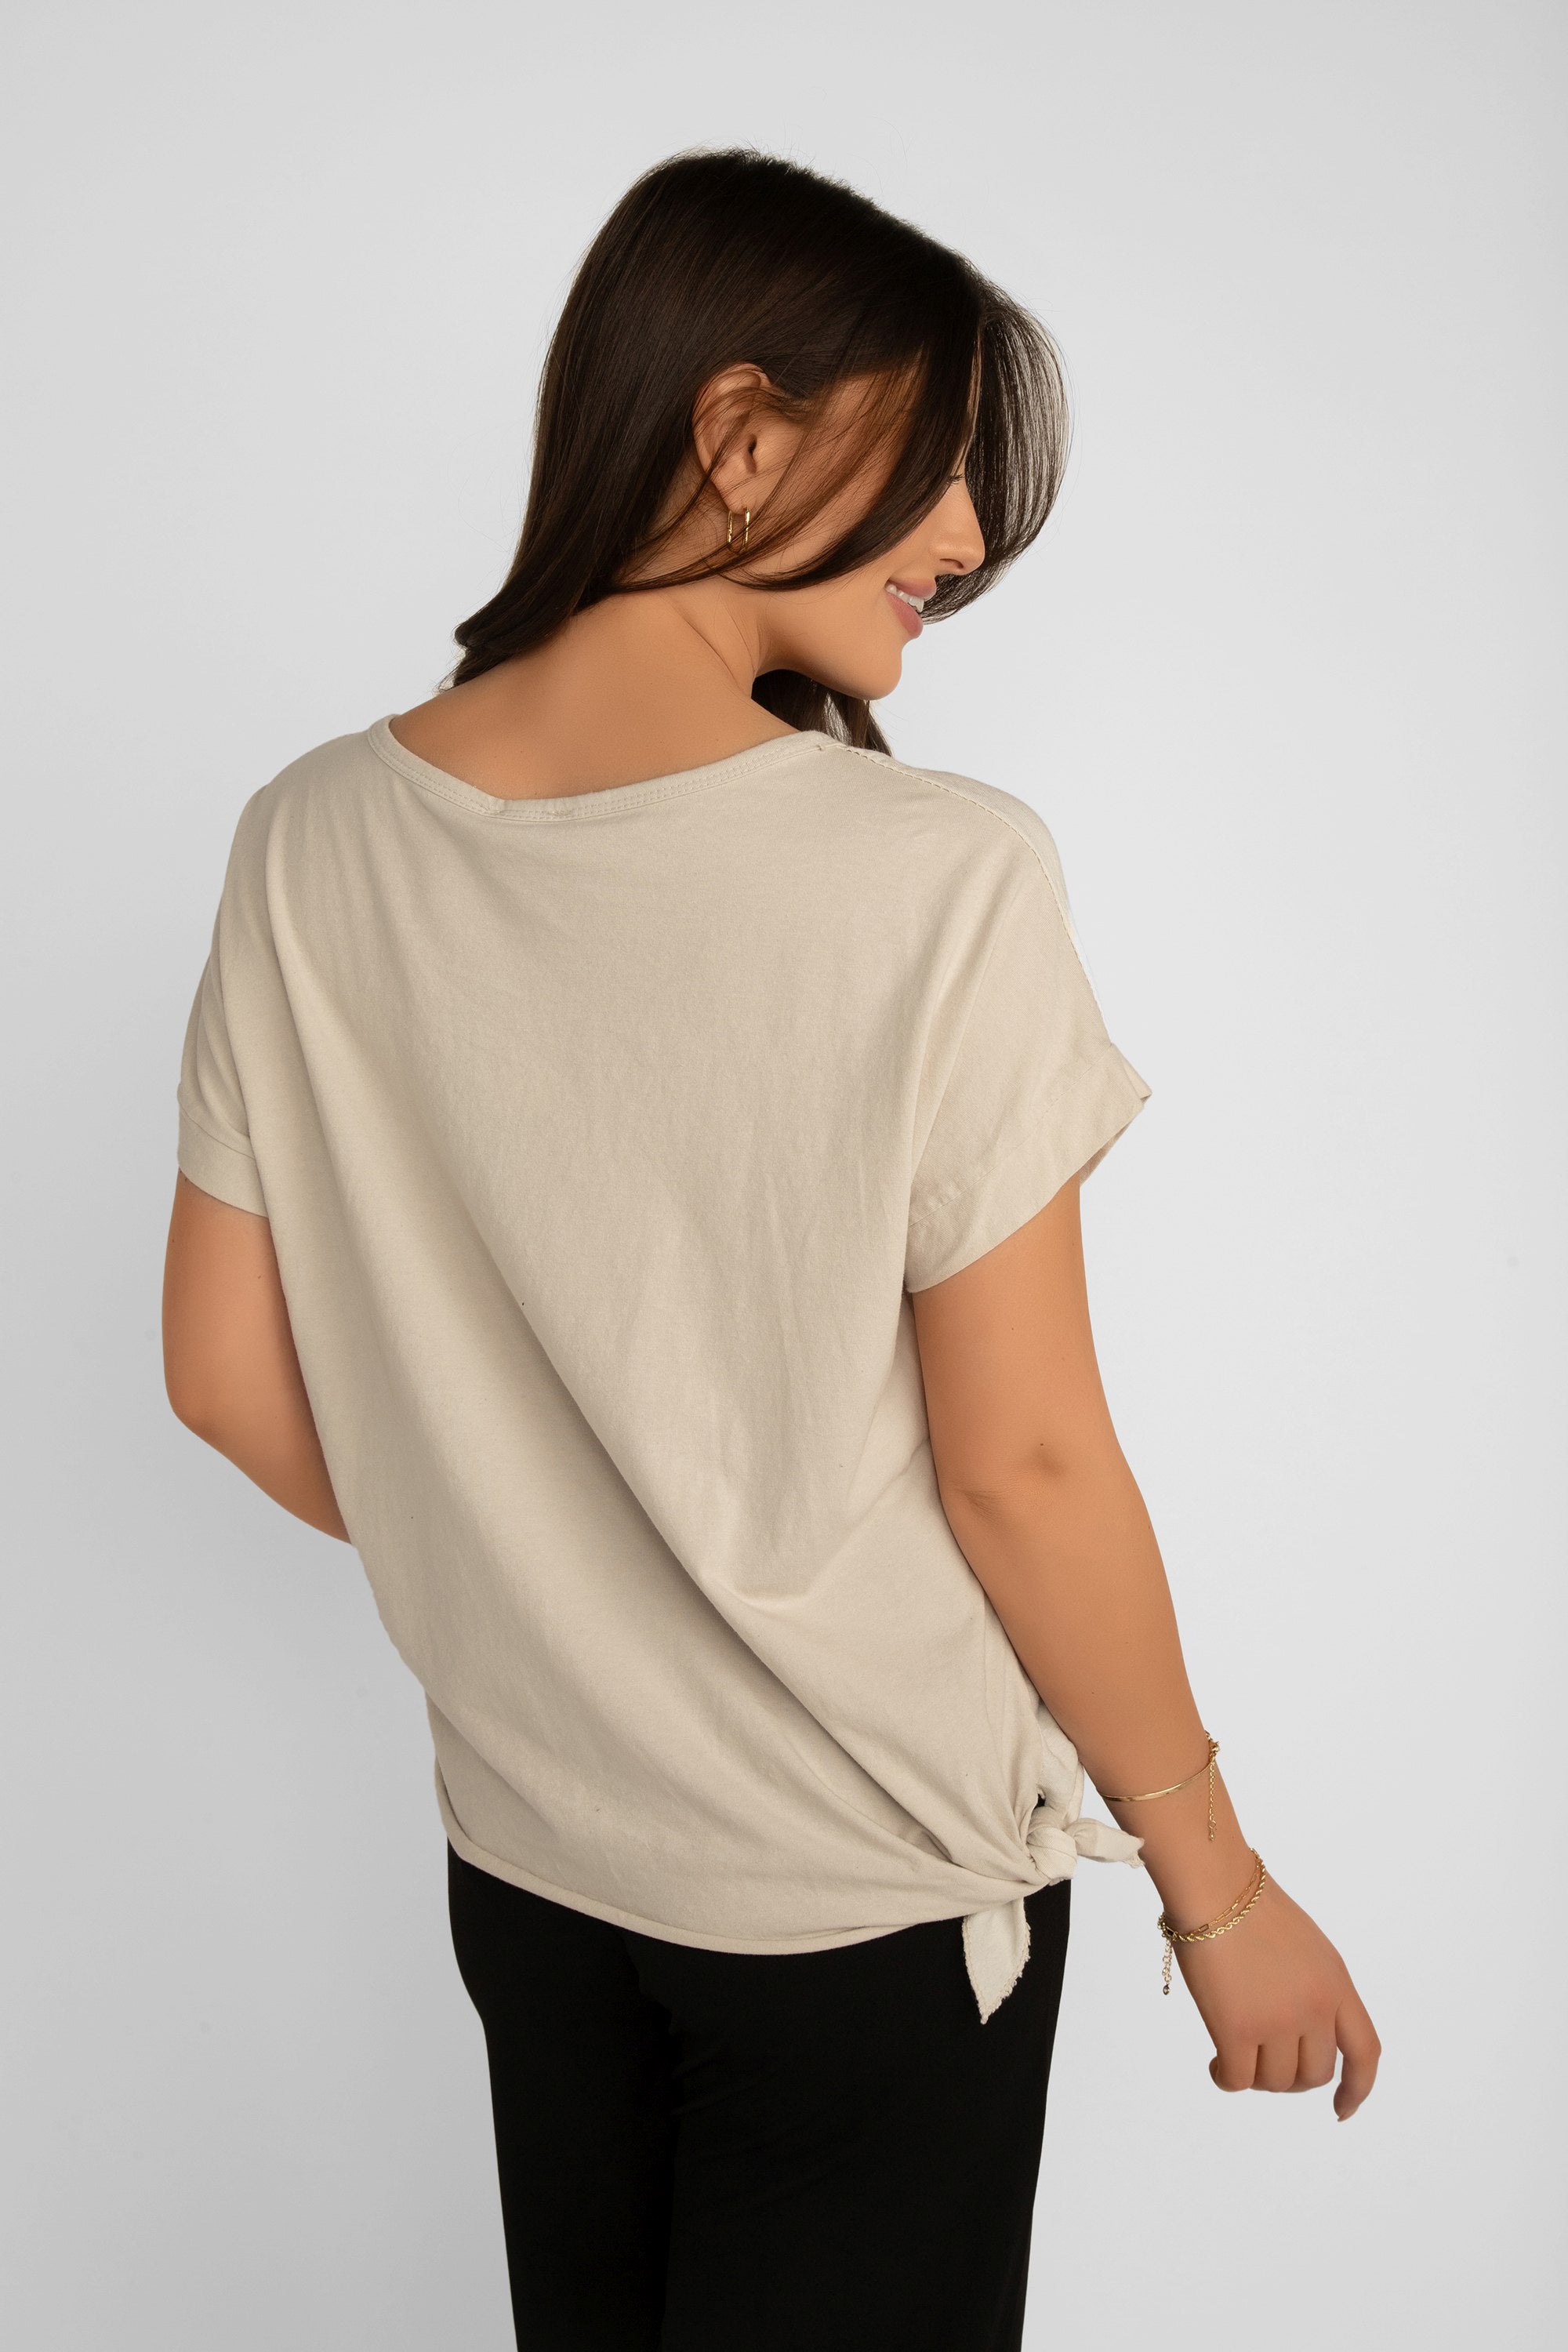 Back view of Elissia (LX35816) Women's Short Sleeve Cotton Blend Top with Foil Flower and Sequin Trim in Beige